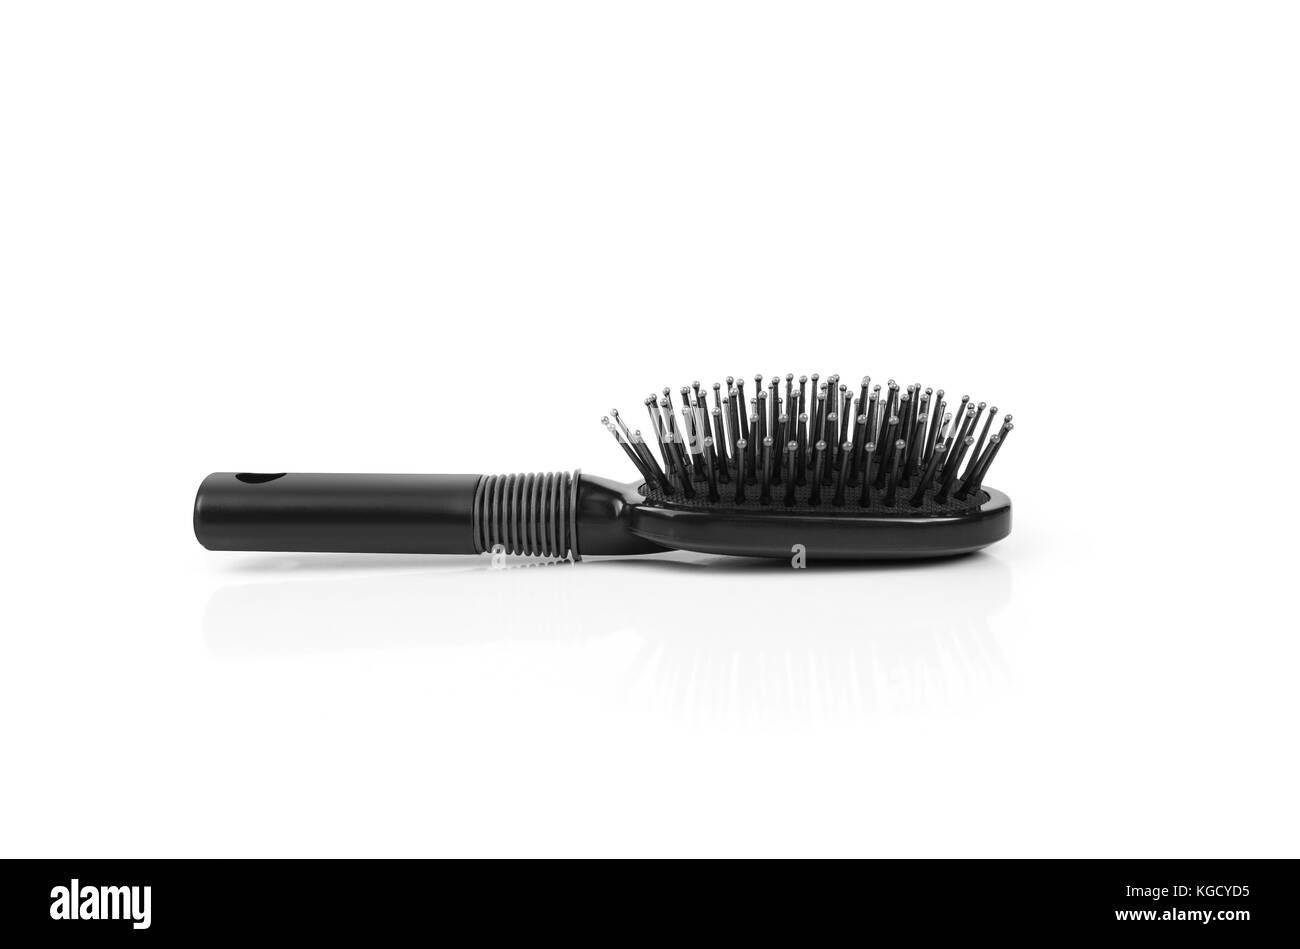 Hair black combs isolated on a white background Stock Photo